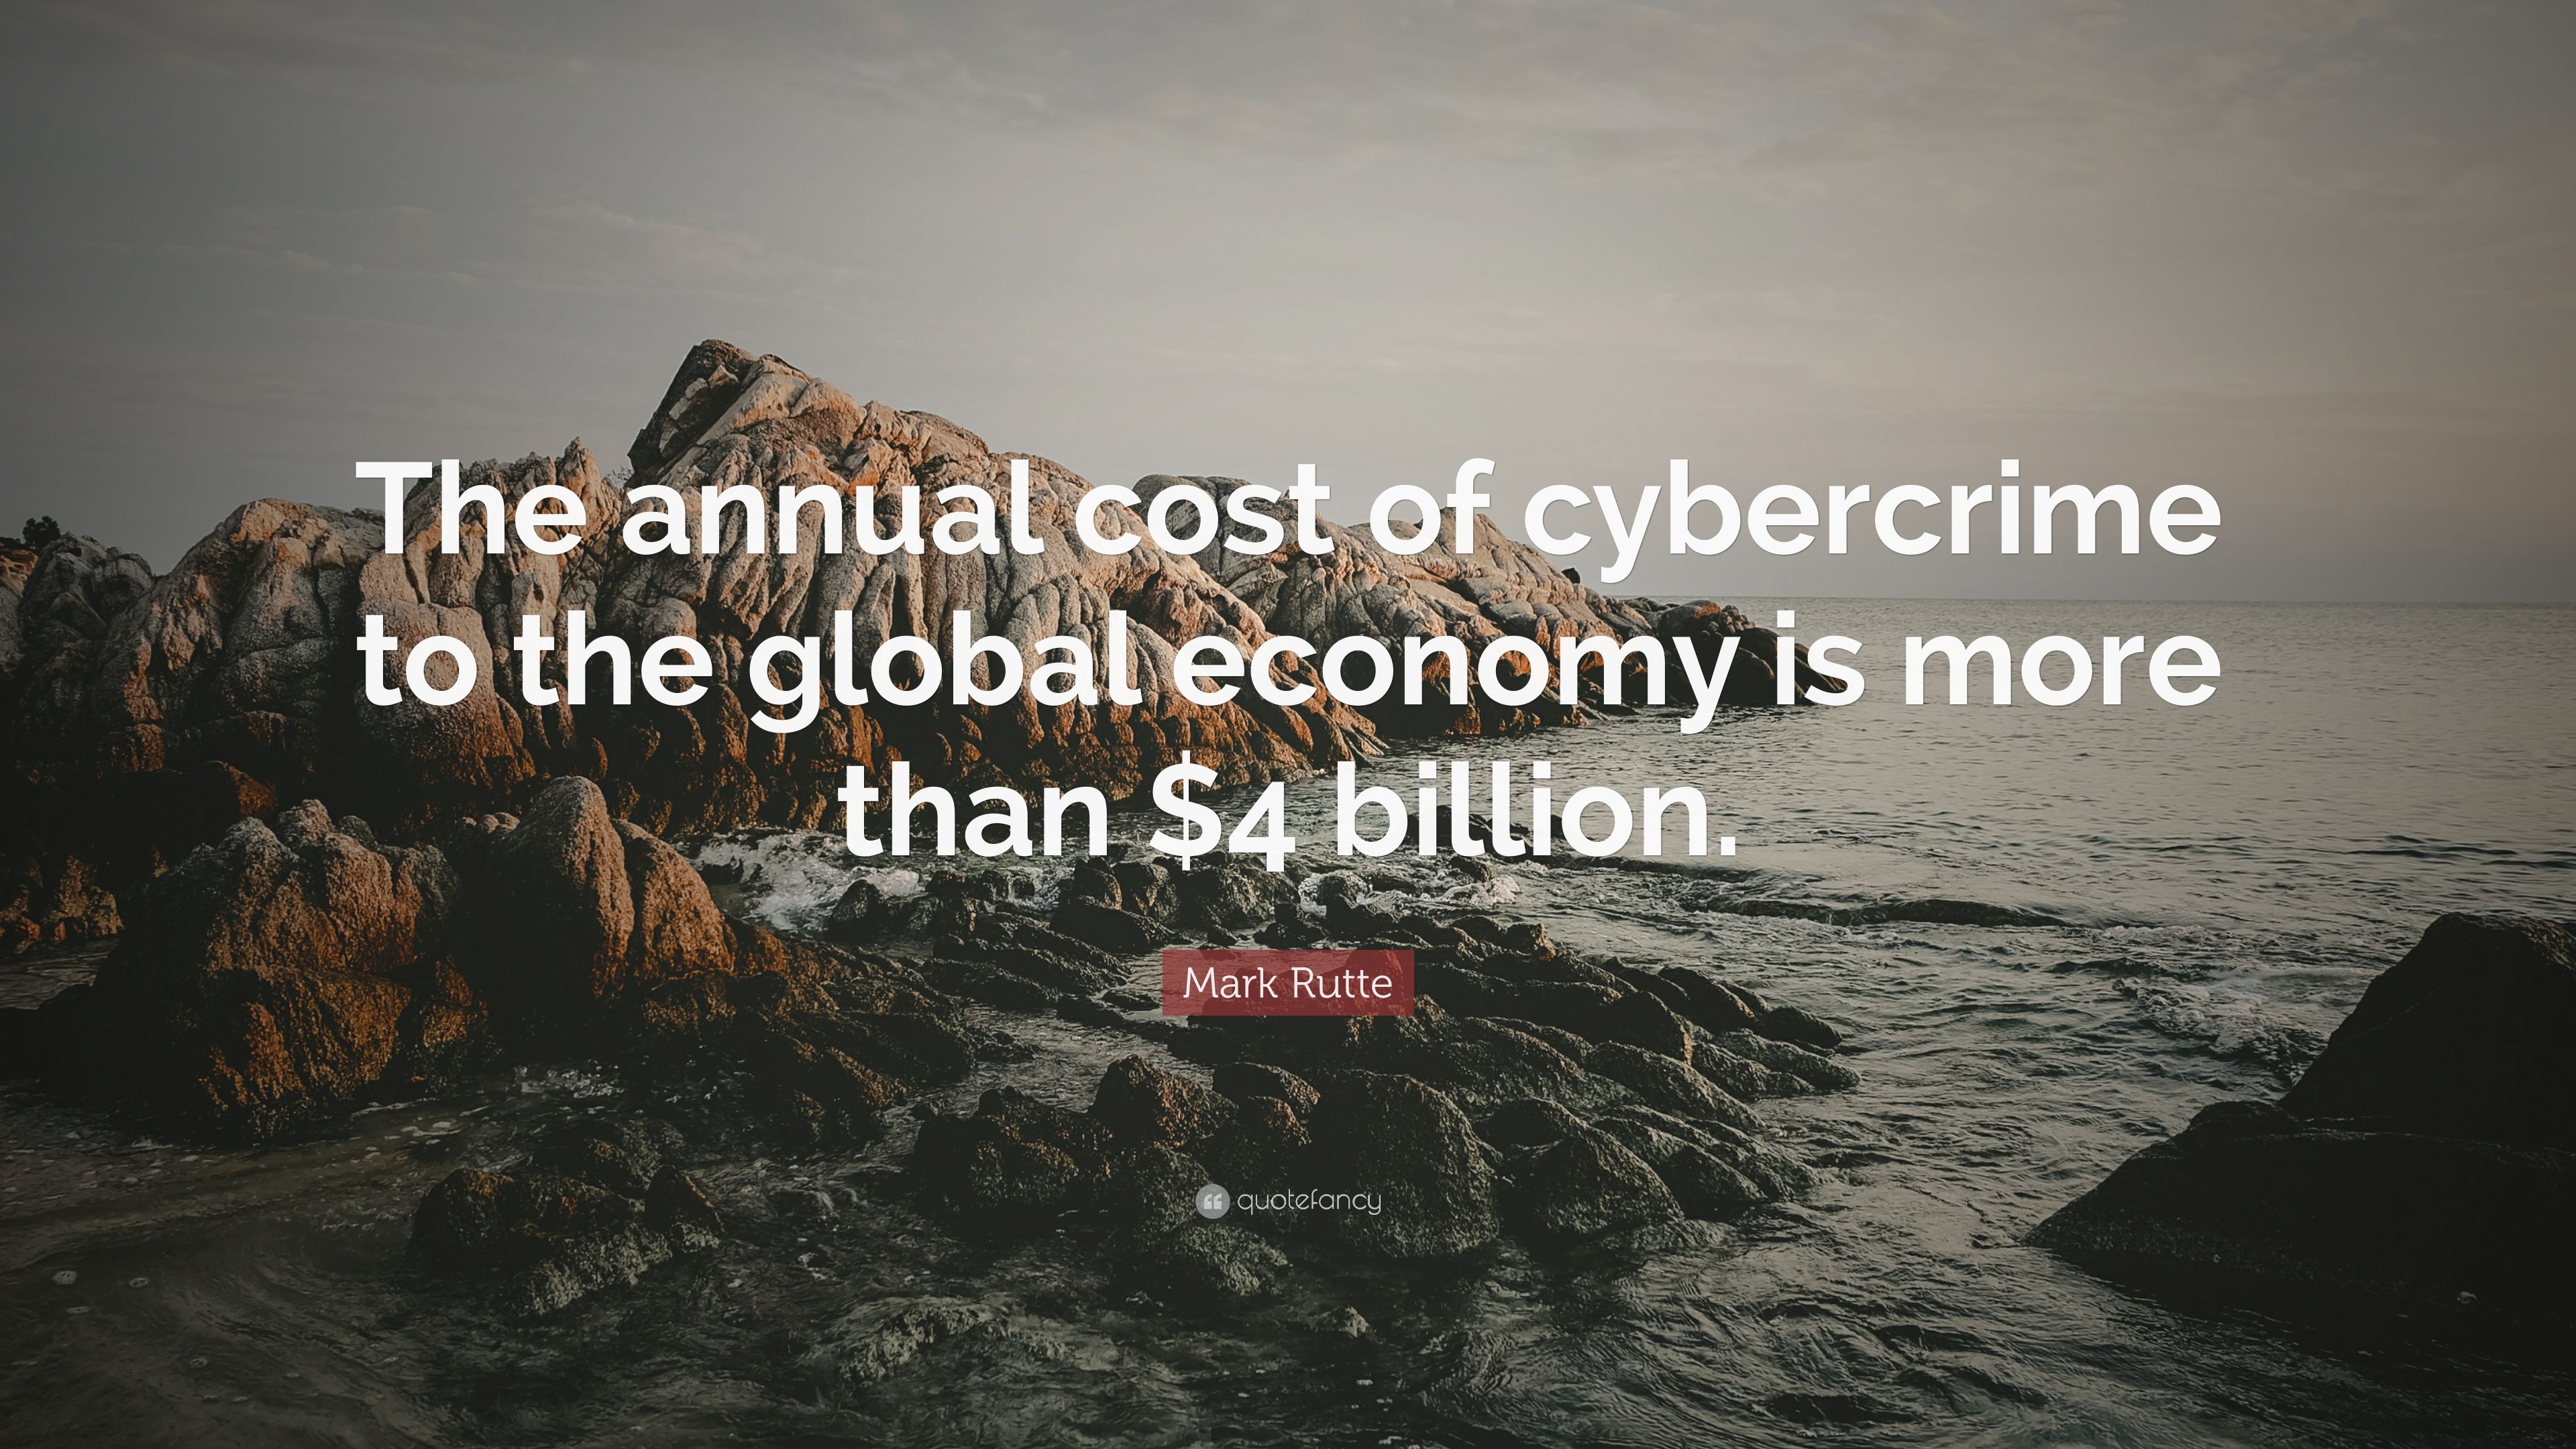 Mark Rutte Quote: “The annual cost of cybercrime to the global economy is more than $4 billion.” (7 wallpaper)